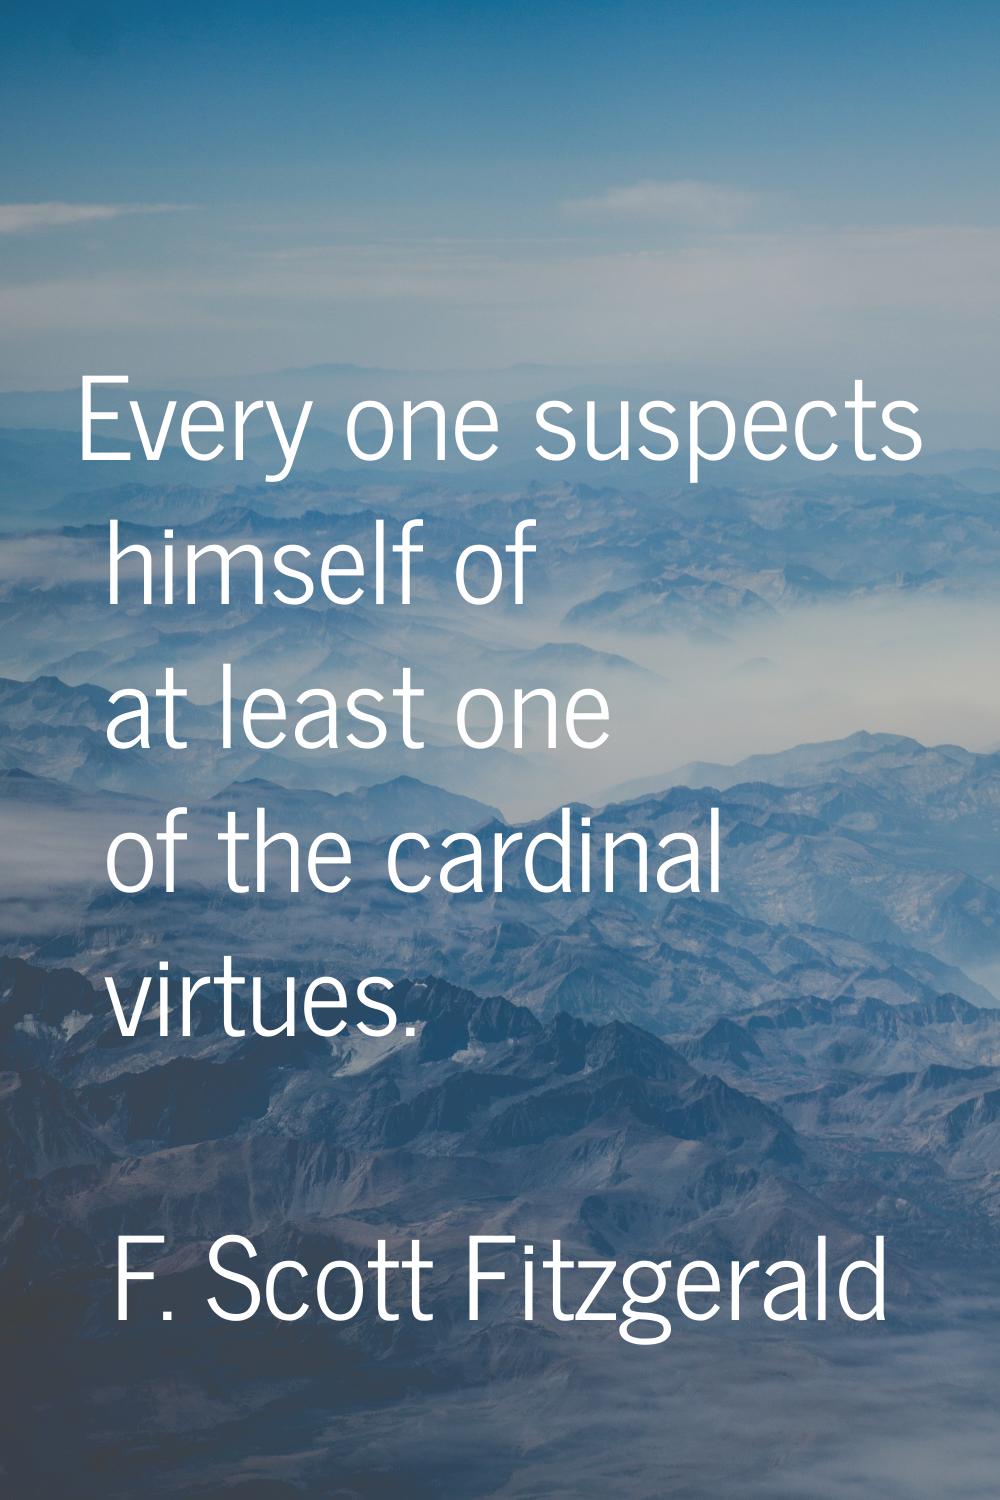 Every one suspects himself of at least one of the cardinal virtues.